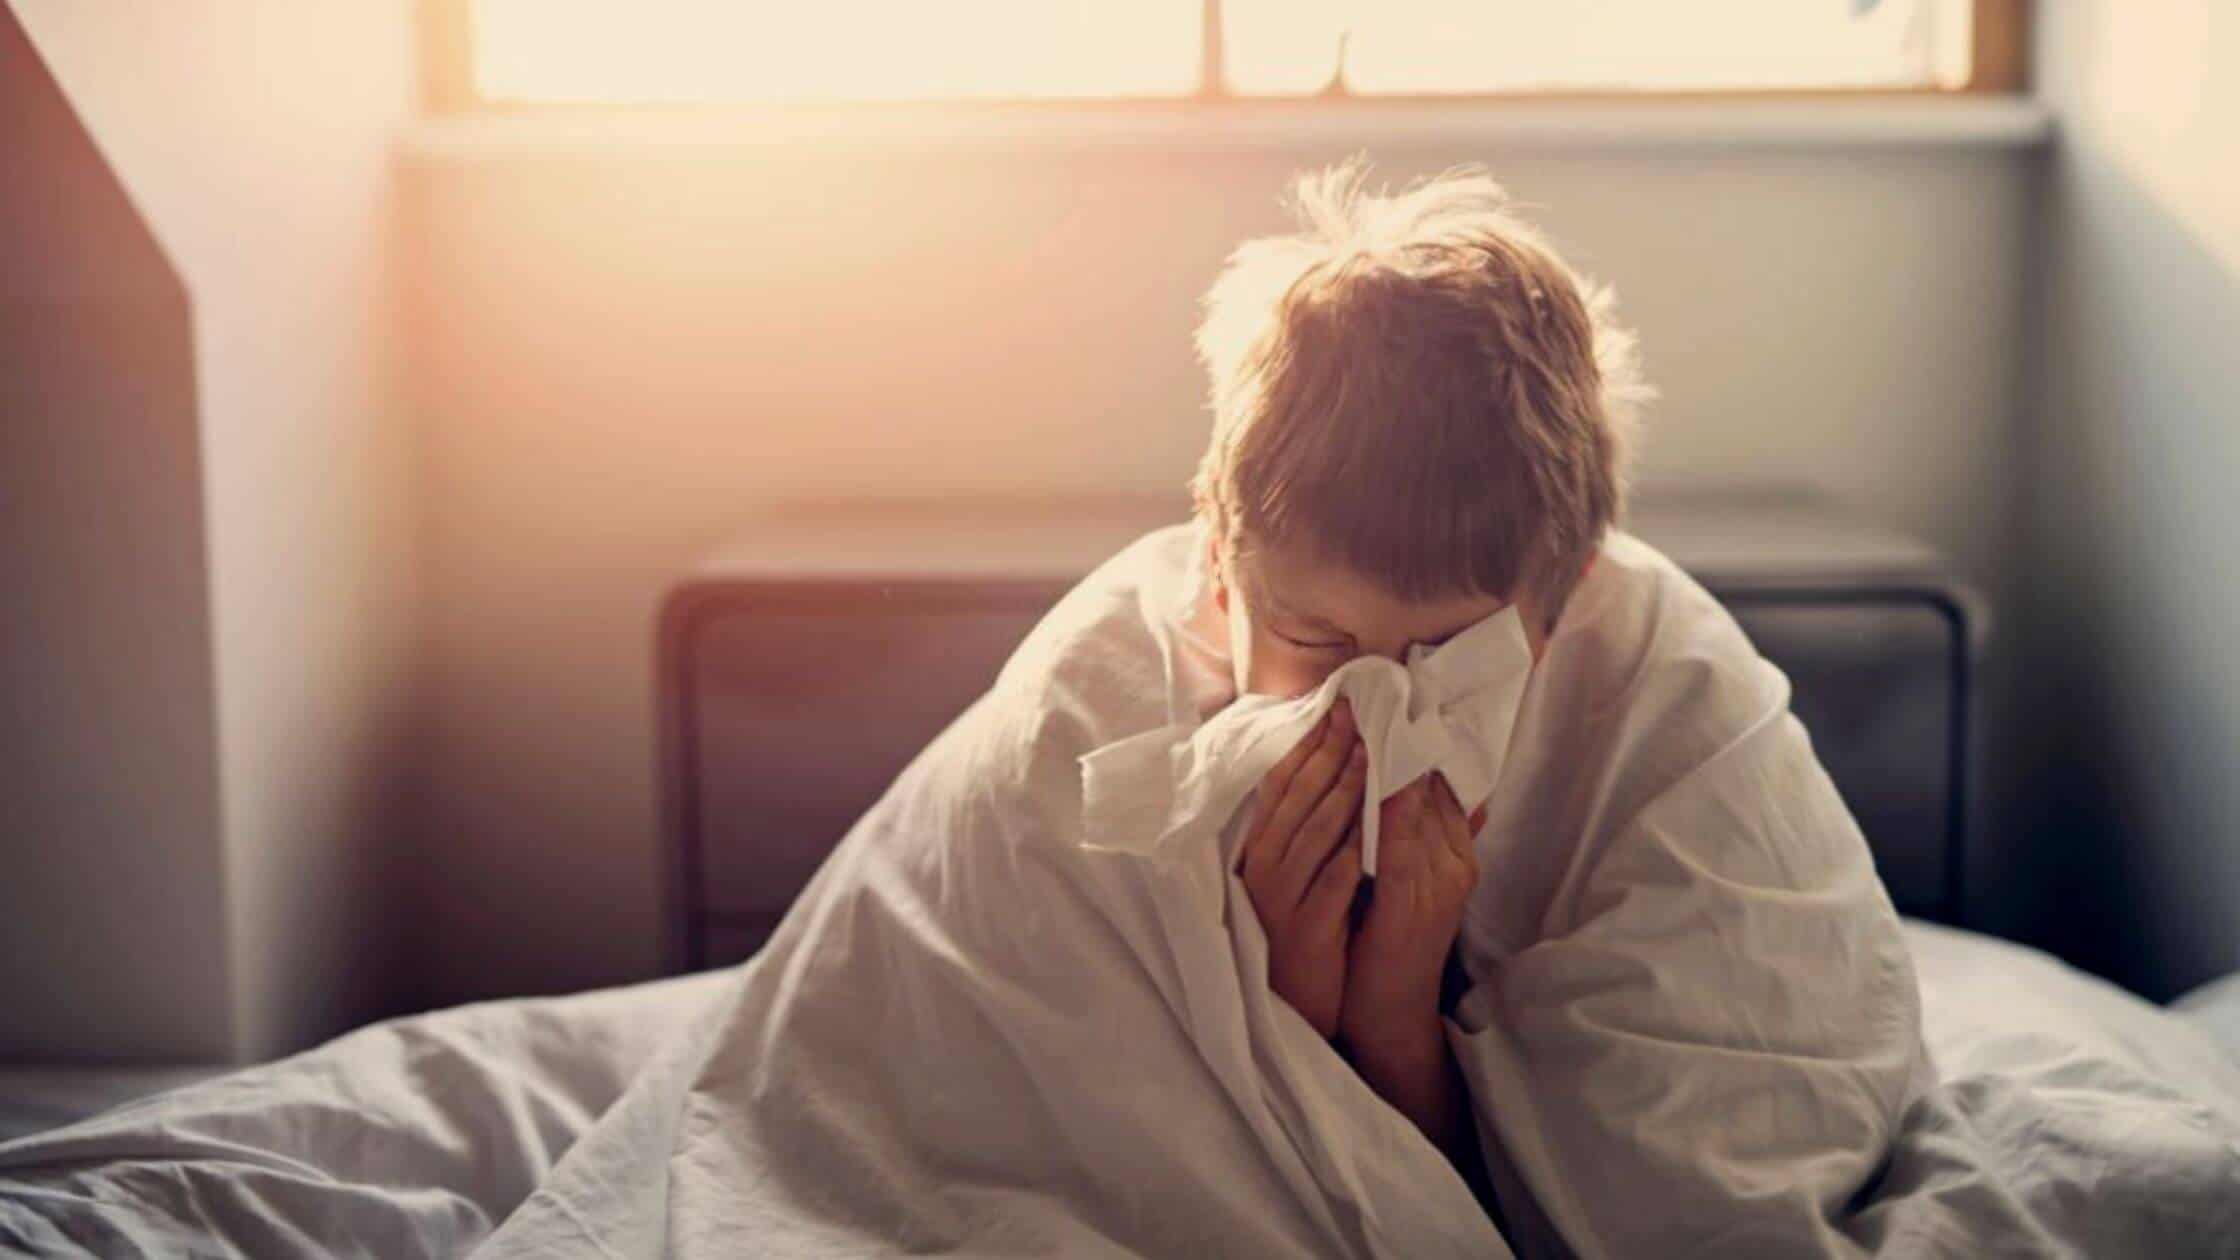 How To Distinguish Between Cold, The Flu, RSV, And Covid-19, In Children